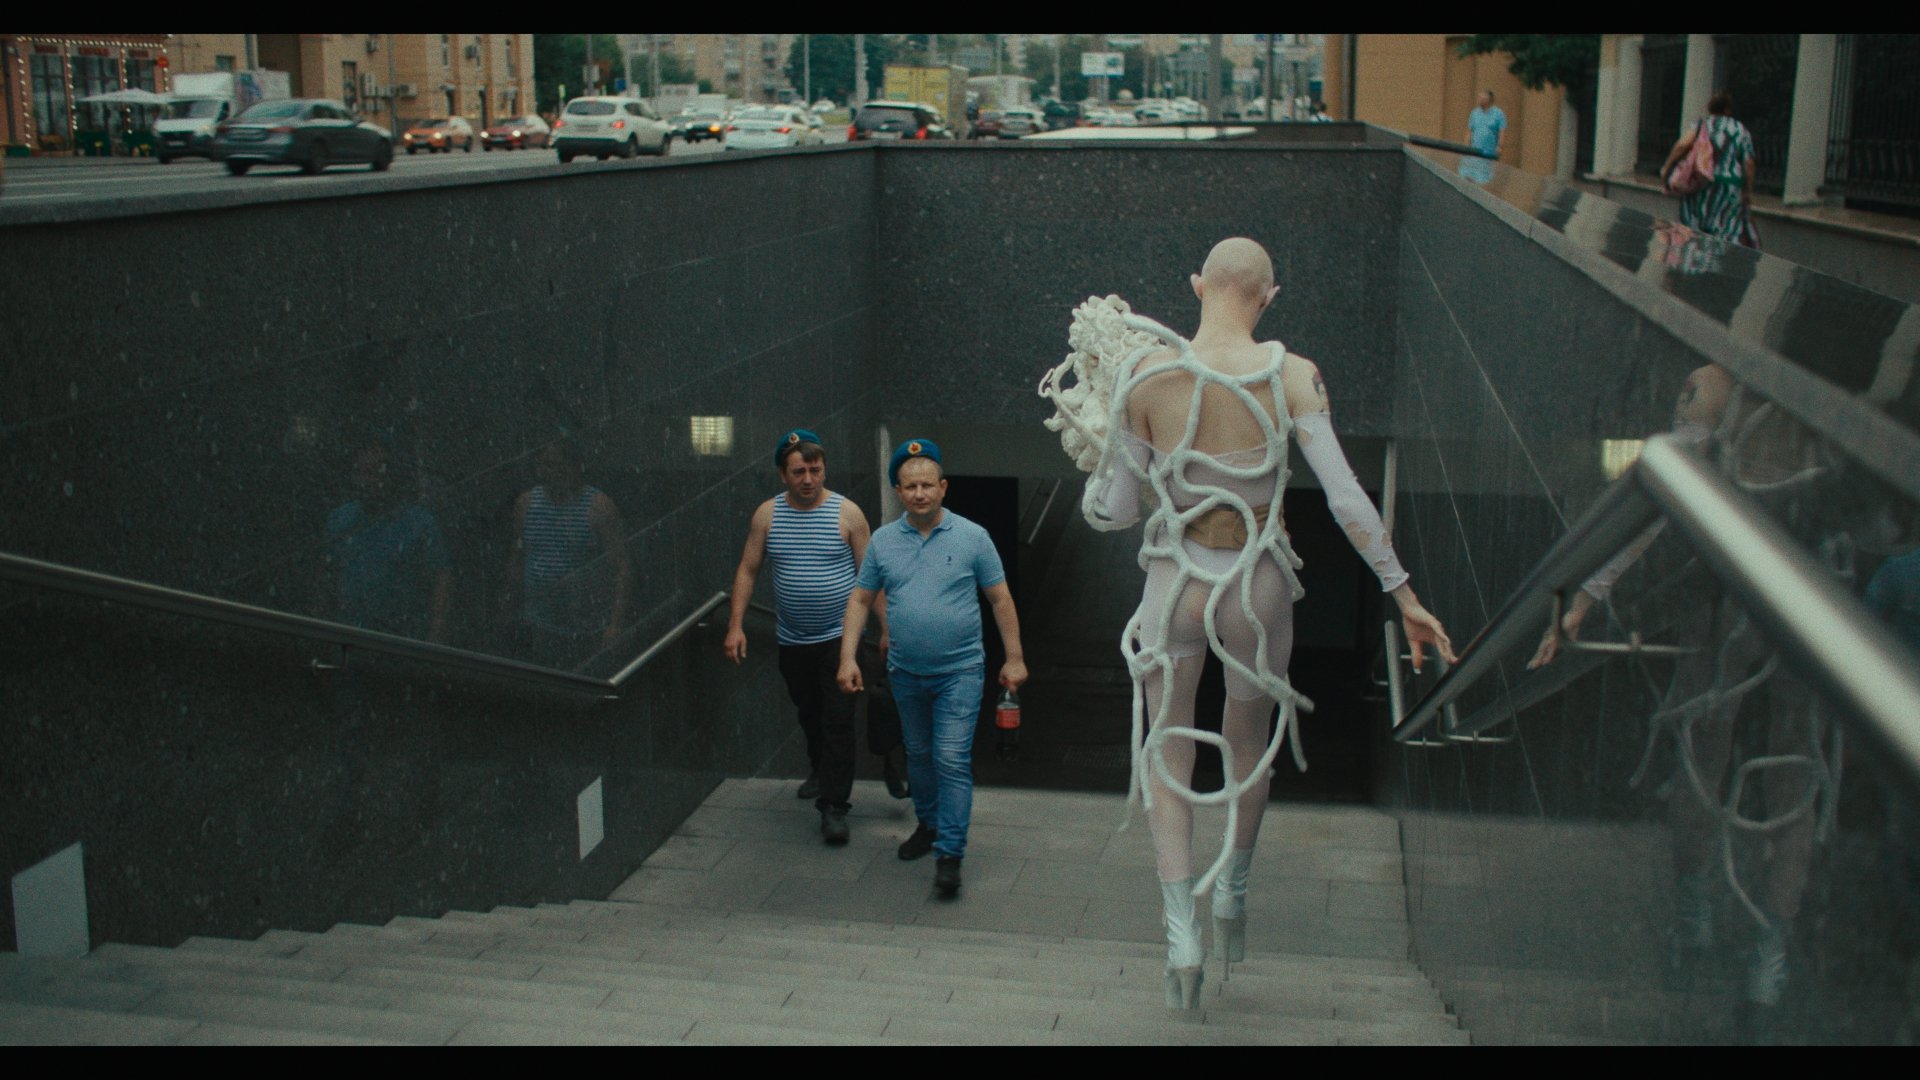 Gena, seen from behind, is wearing a torn body stocking under a complex, root-like white costume. She is bald and carrying her custom wig in her hands. She's wearing high-heeled boots and carefully walking down steps into Moscow's underground, as two onlookers stare.